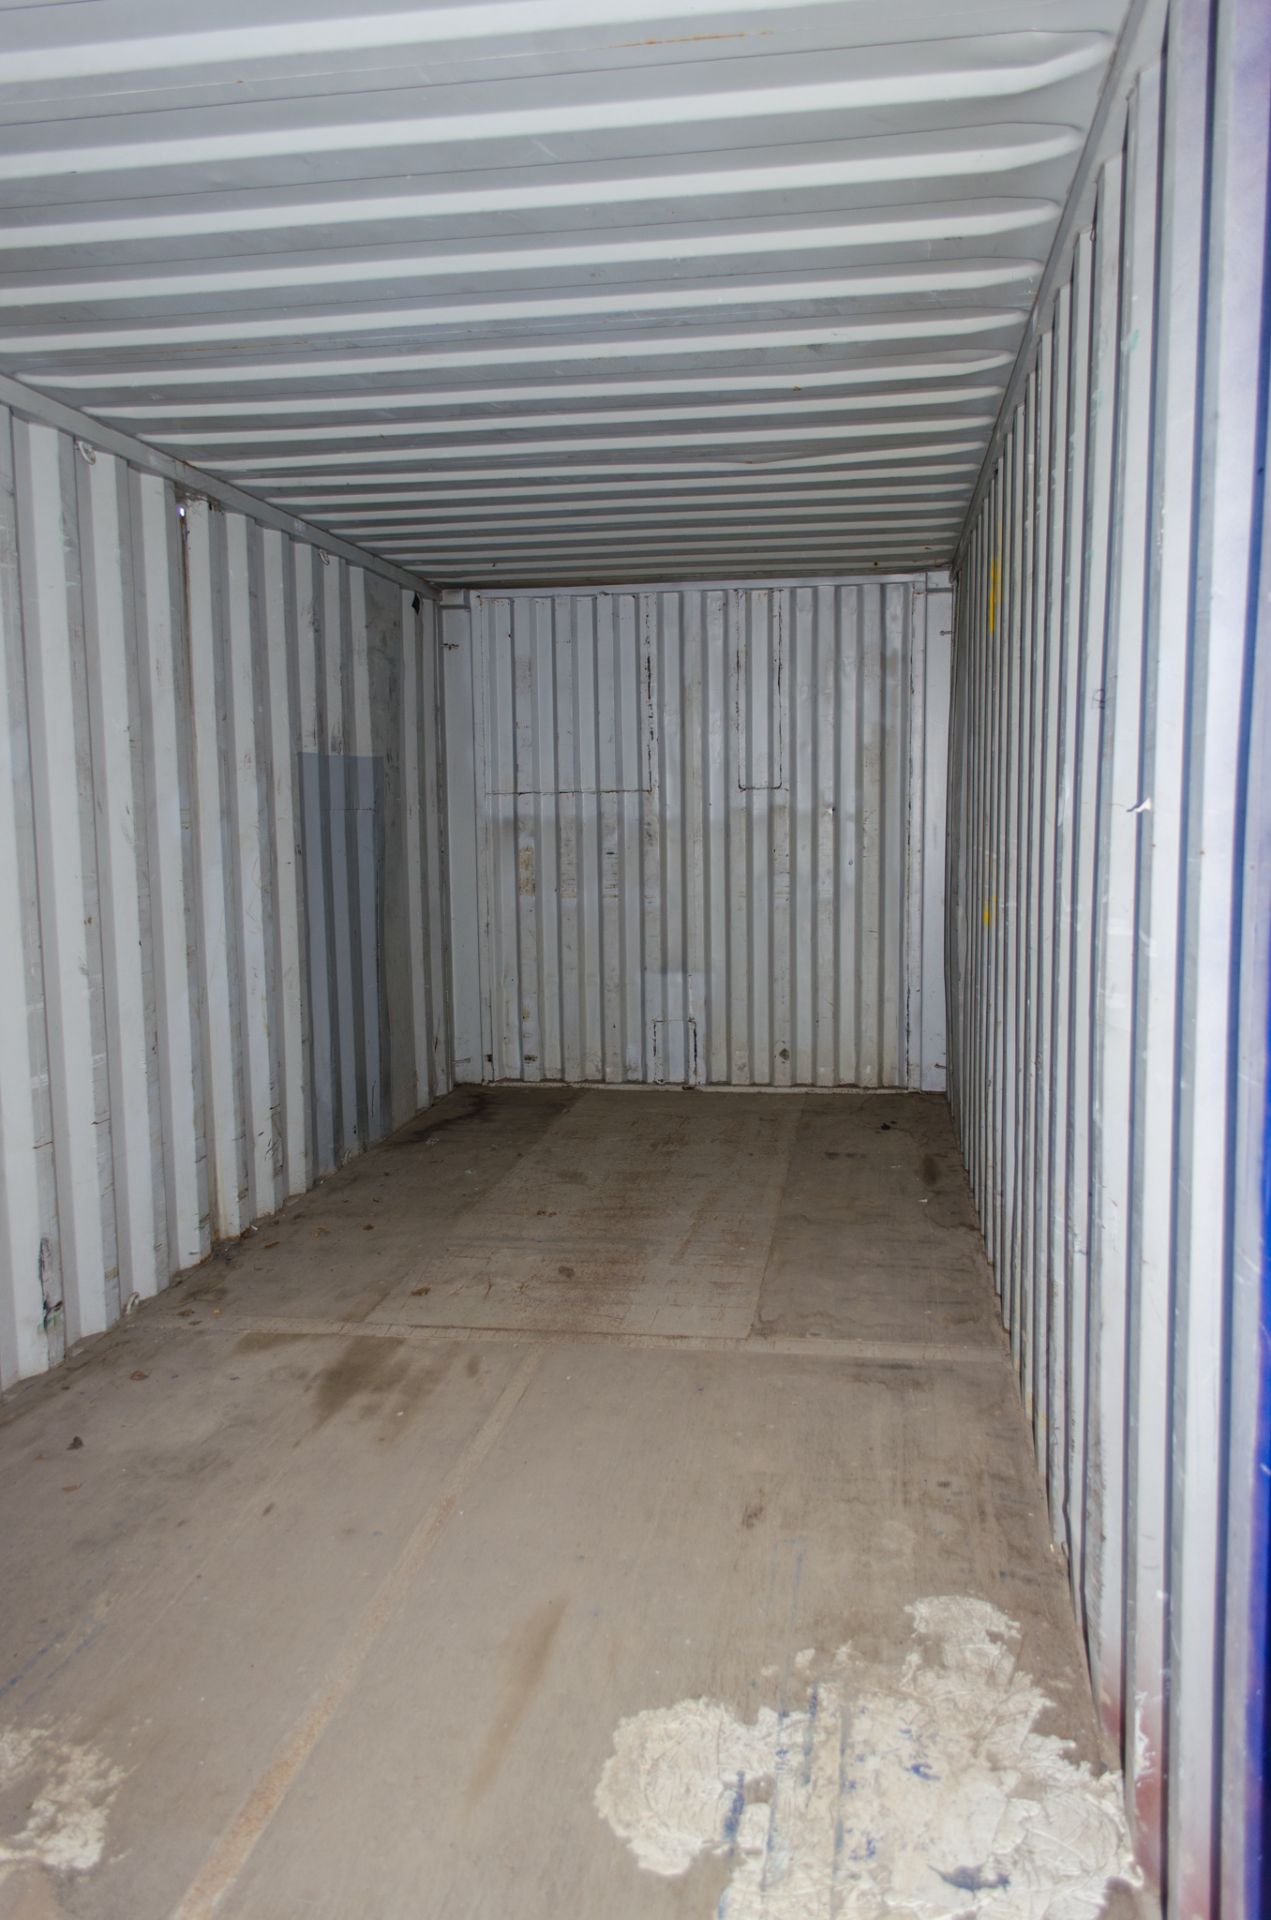 20 ft x 8 ft steel shipping container A231582 - Image 4 of 4